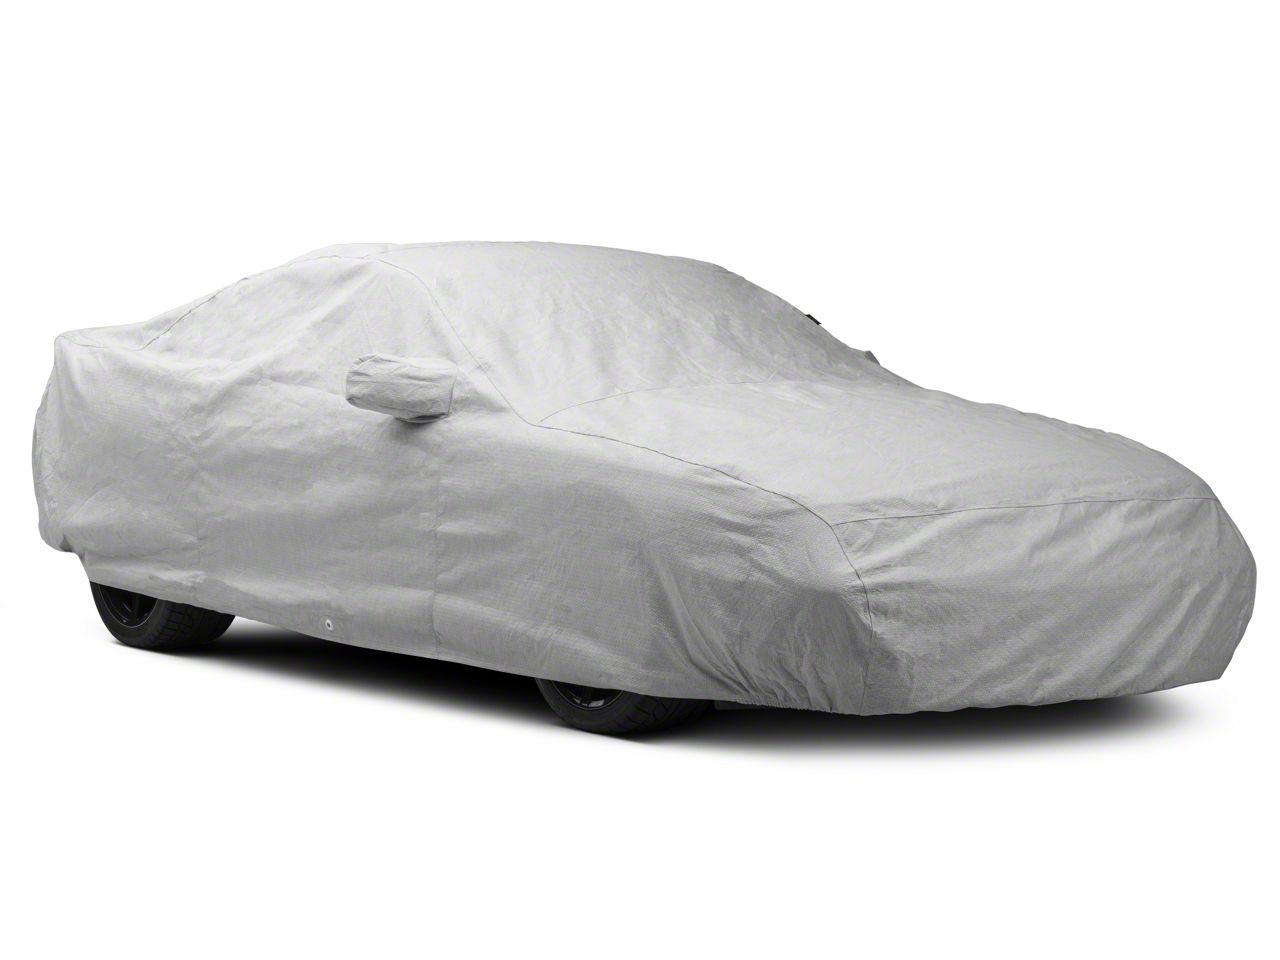 Covercraft 3 Layer Moderate Climate Outdoor Car Cover